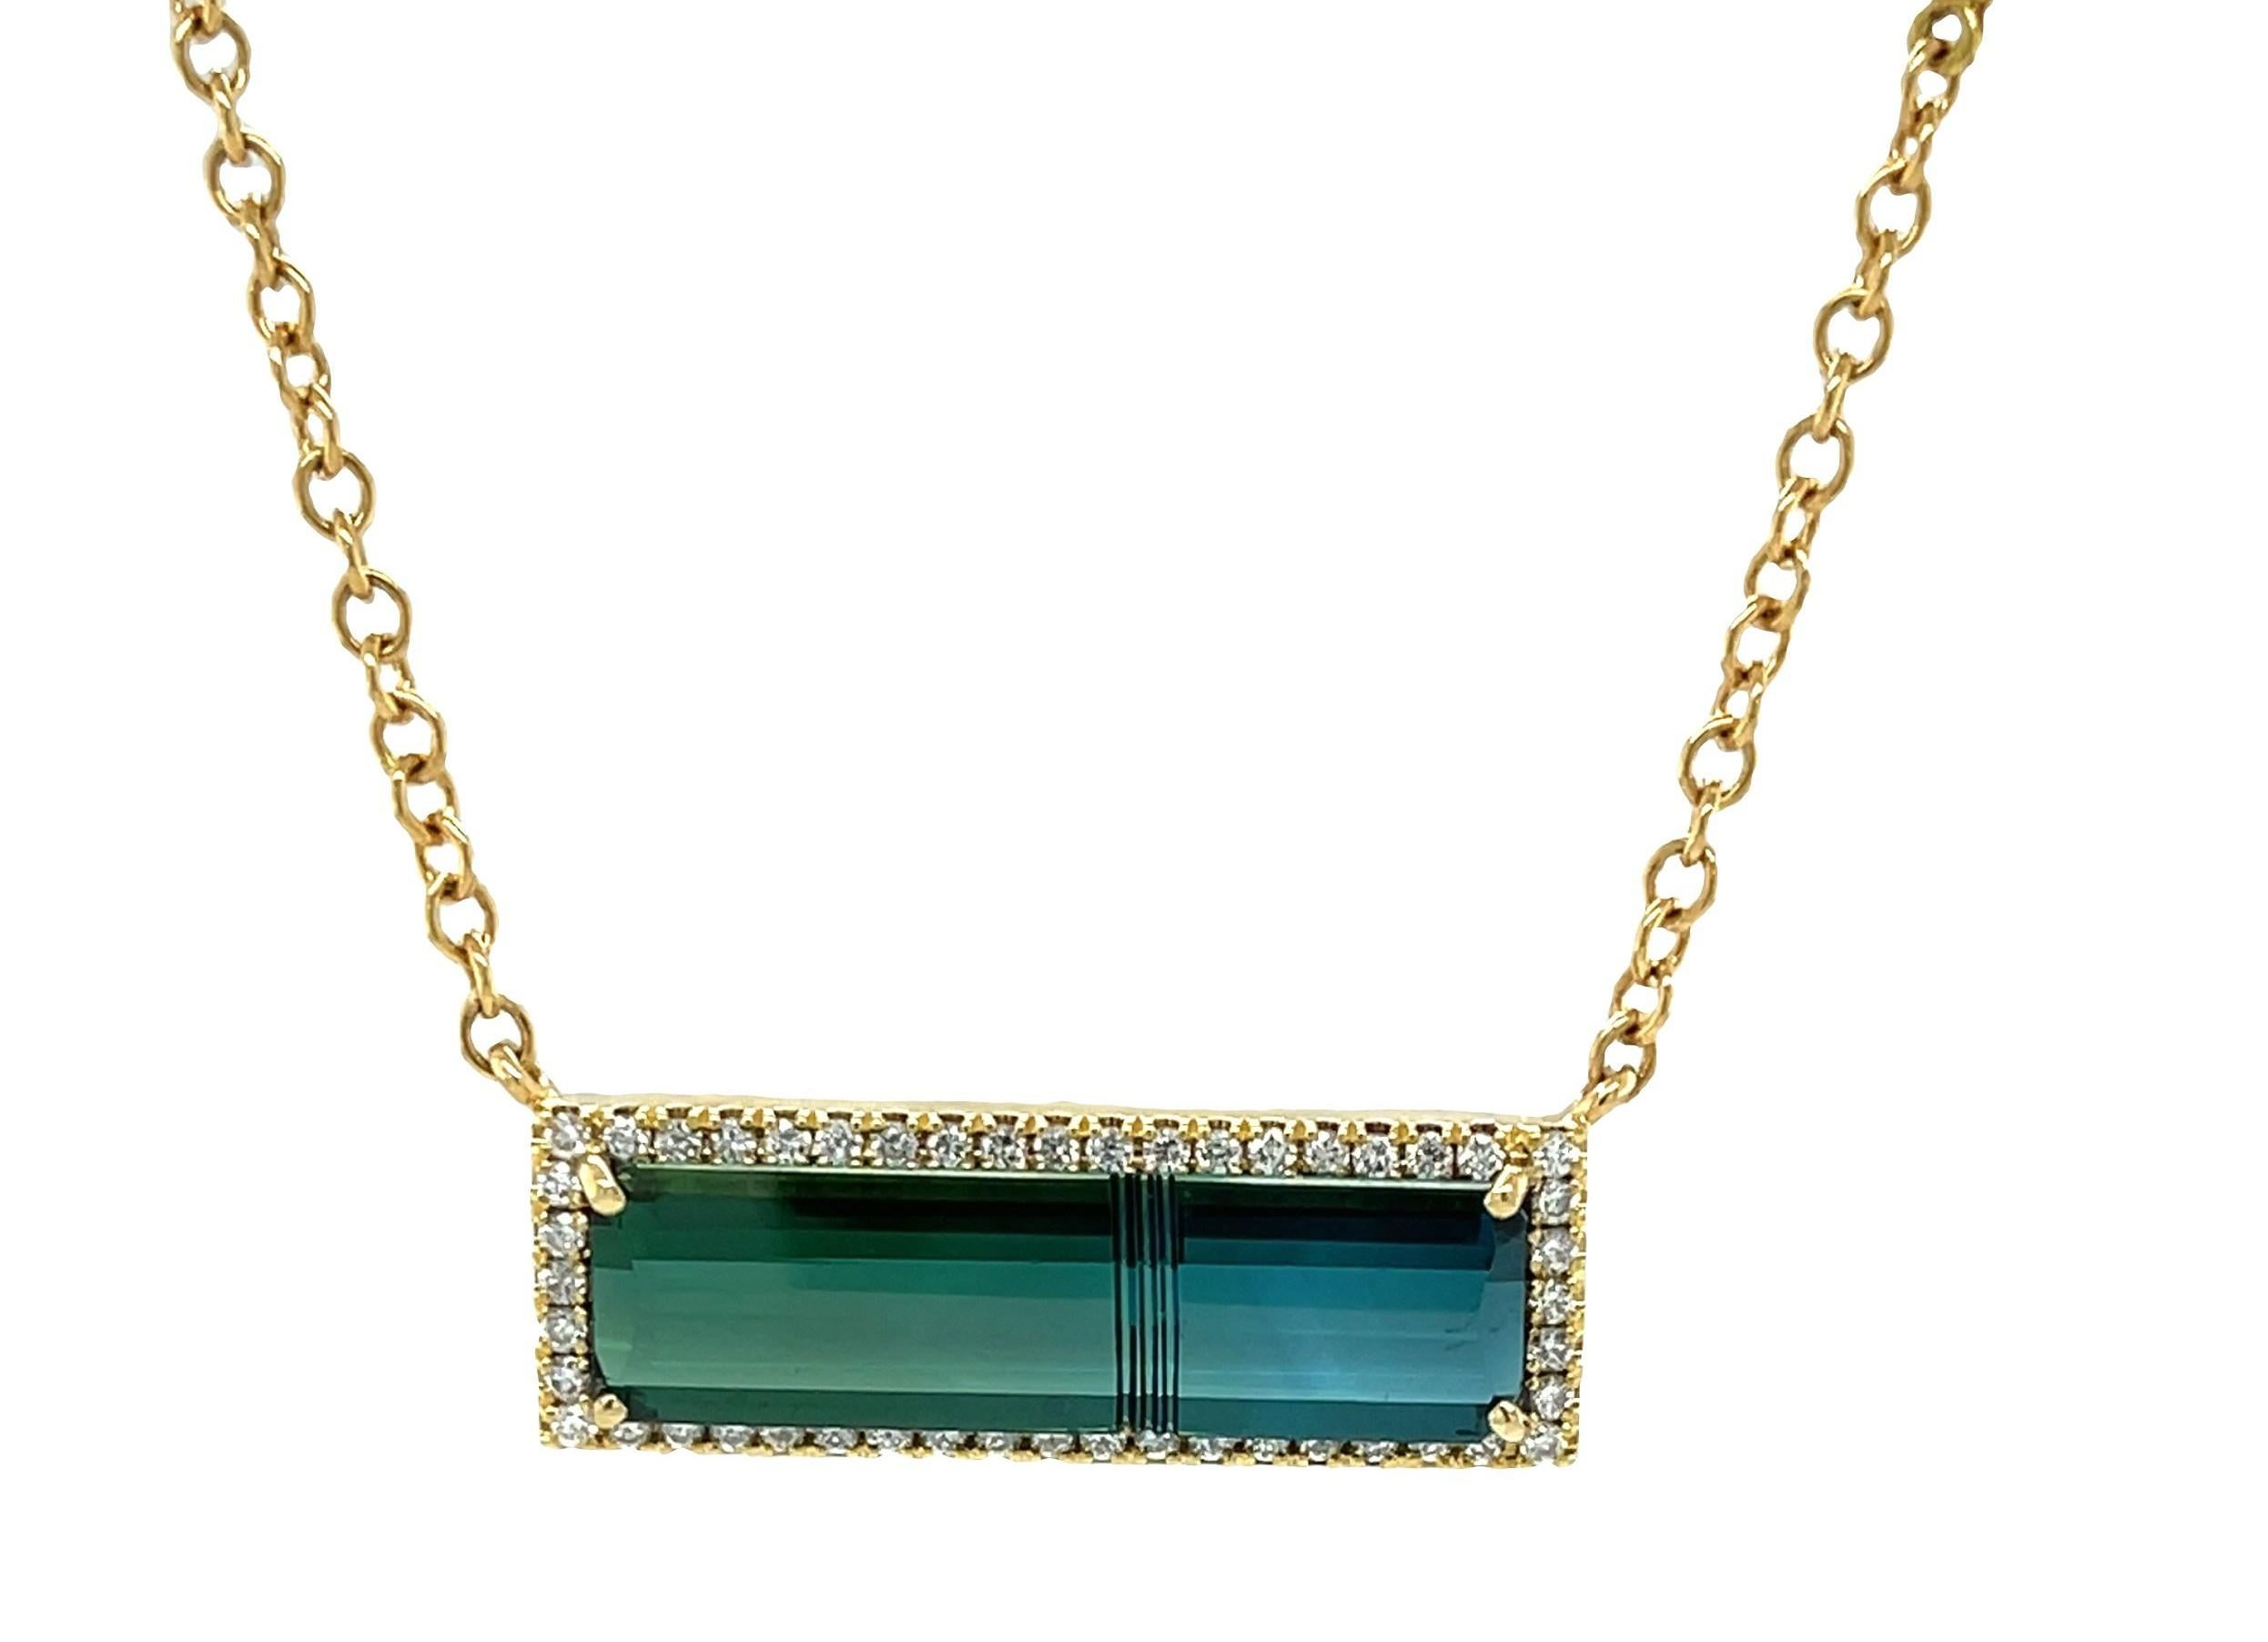 The beautiful elongated shape of this indicolite tourmaline displays an uncharacteristic bicolor blend of teal and green.  It is a custom cut piece that is carved on the intersection of the two colors it displays. This sleek gem is showcased in a